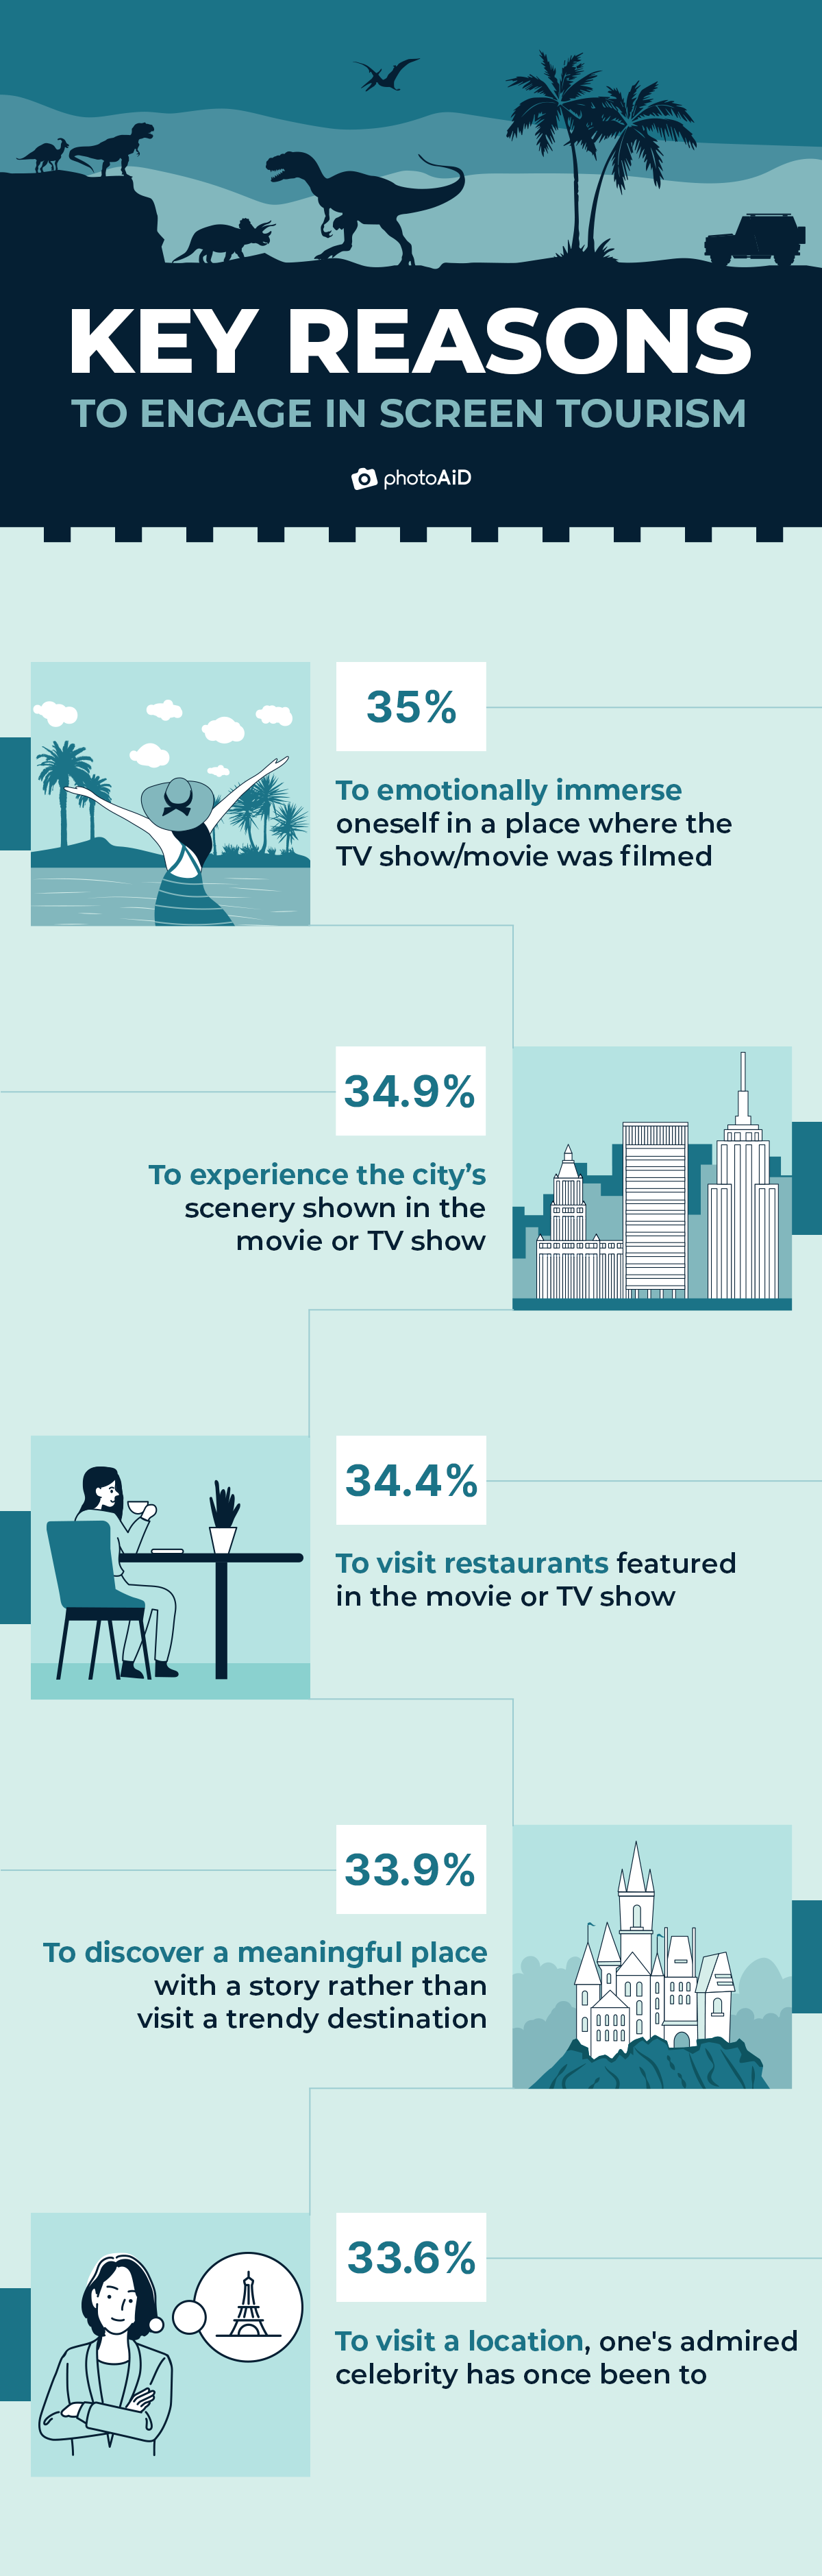  key reasons to engage in film tourism